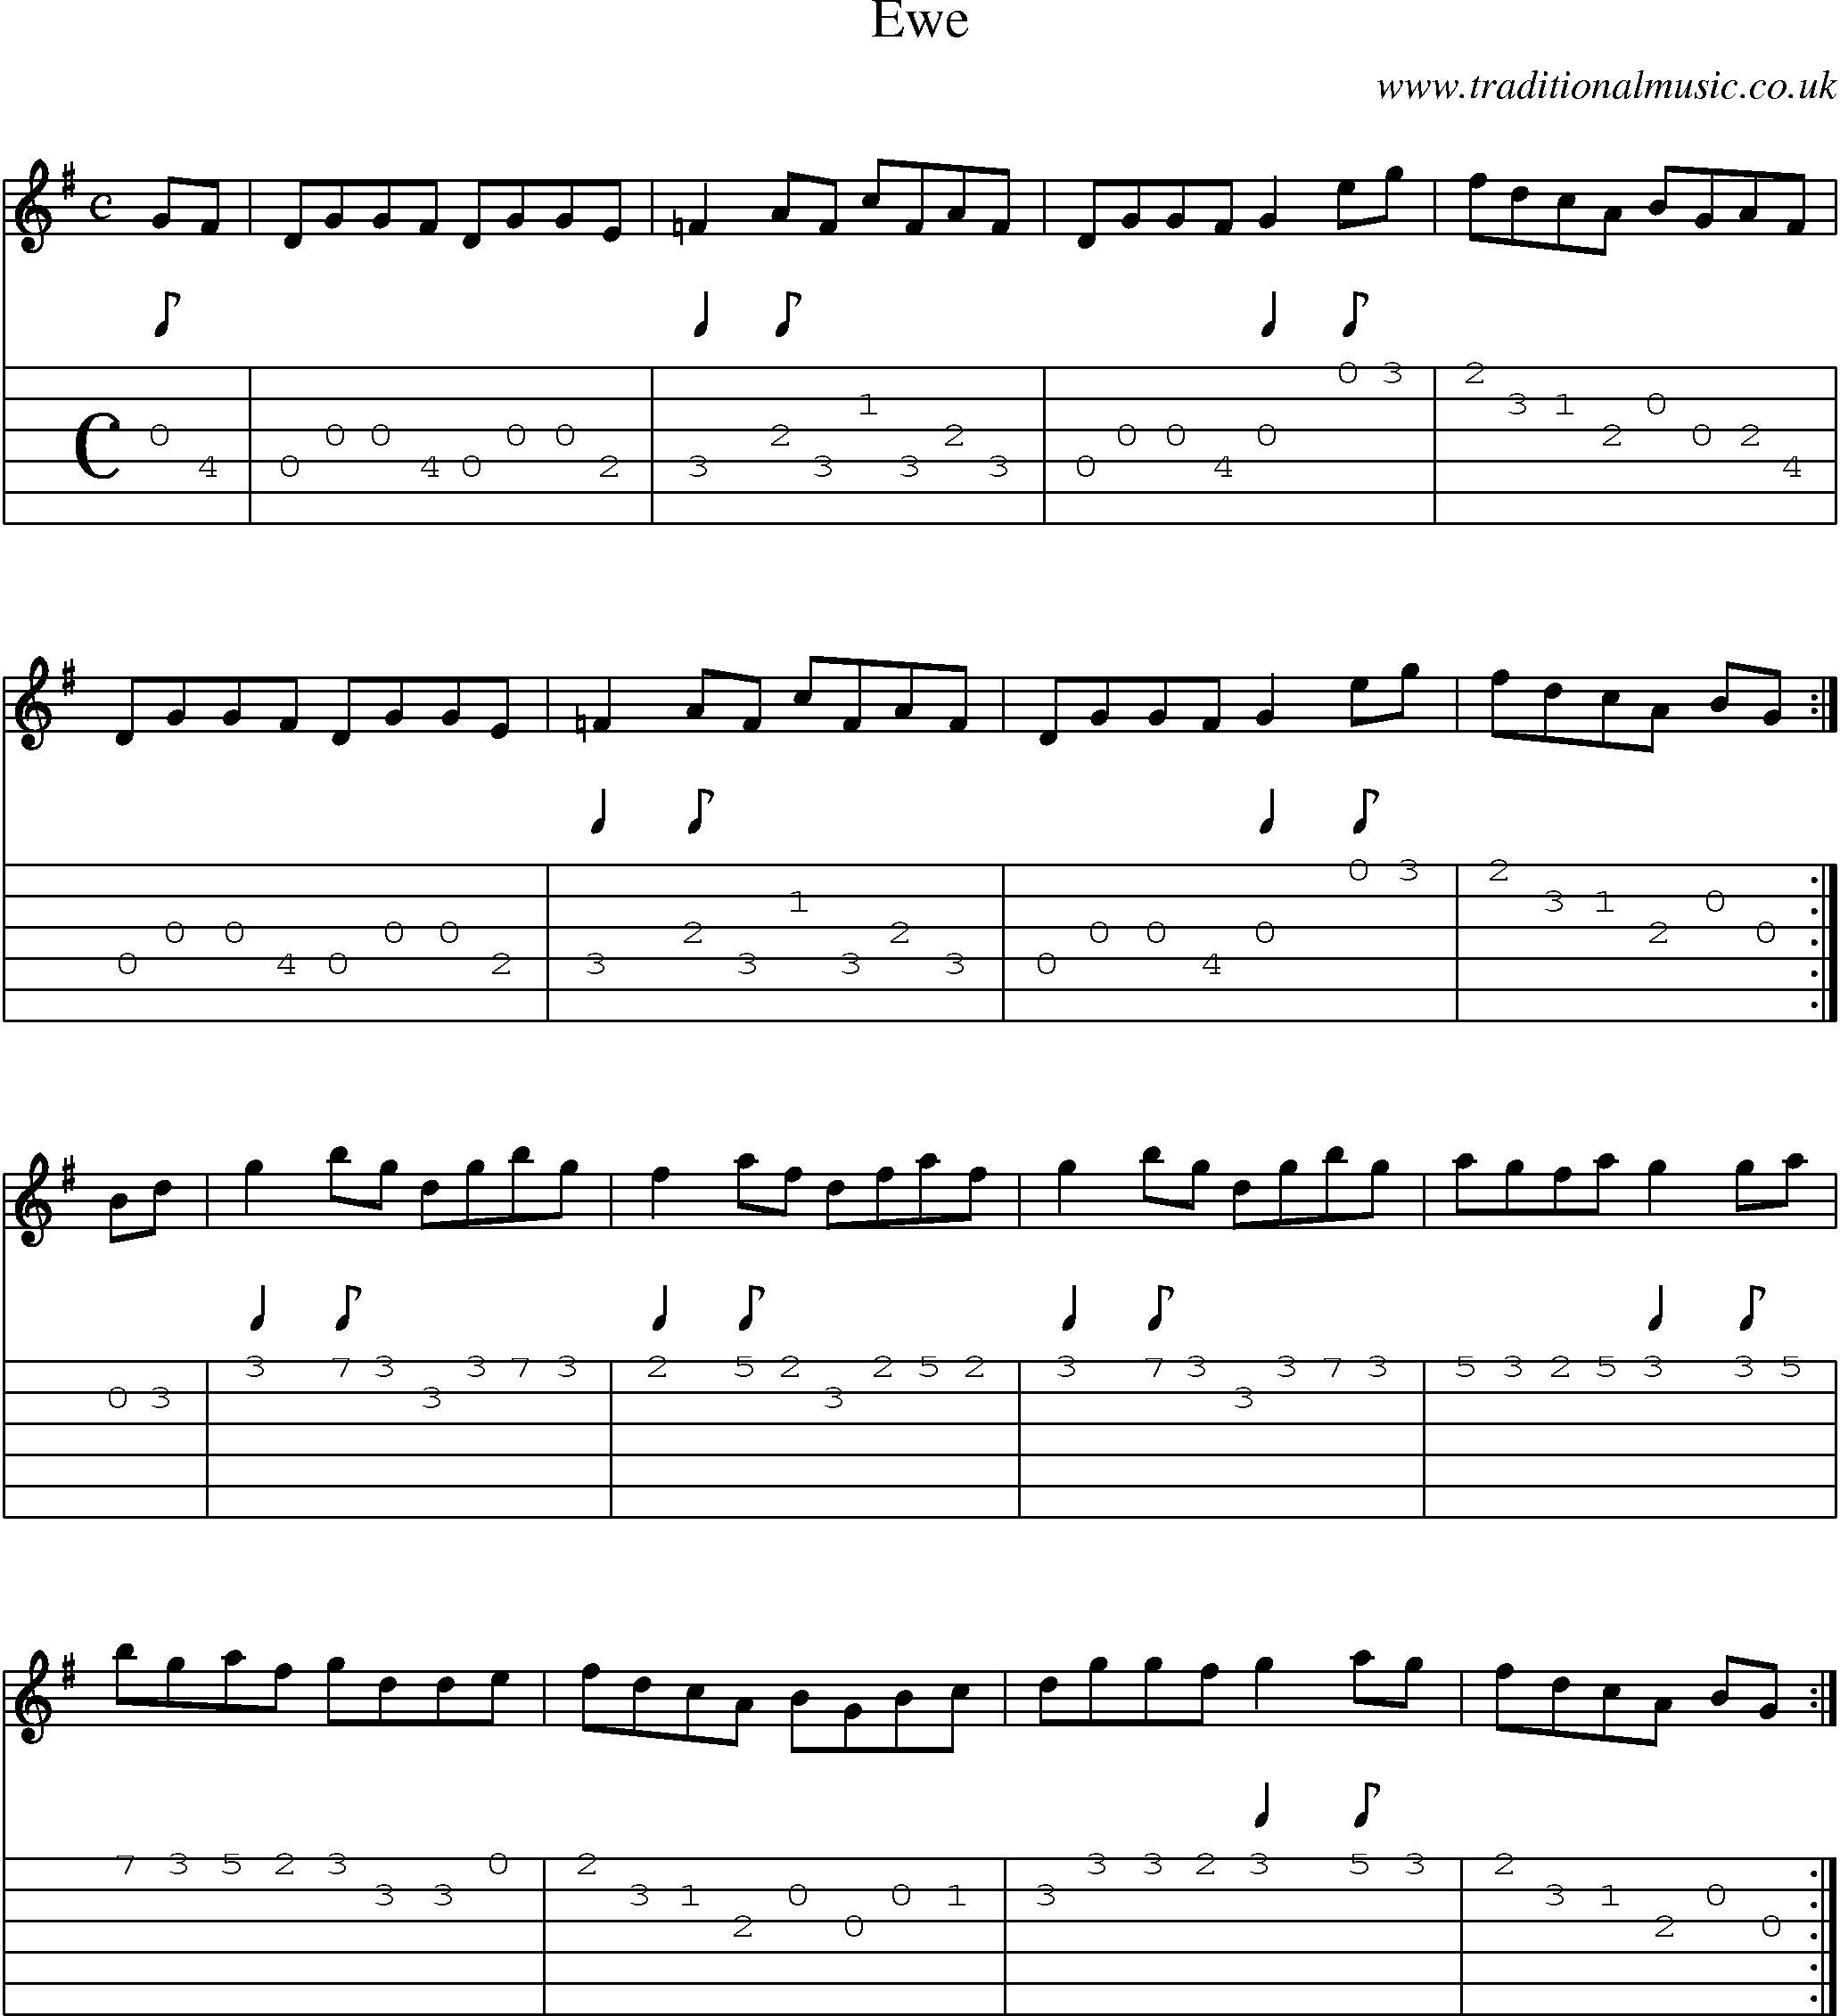 Music Score and Guitar Tabs for Ewe